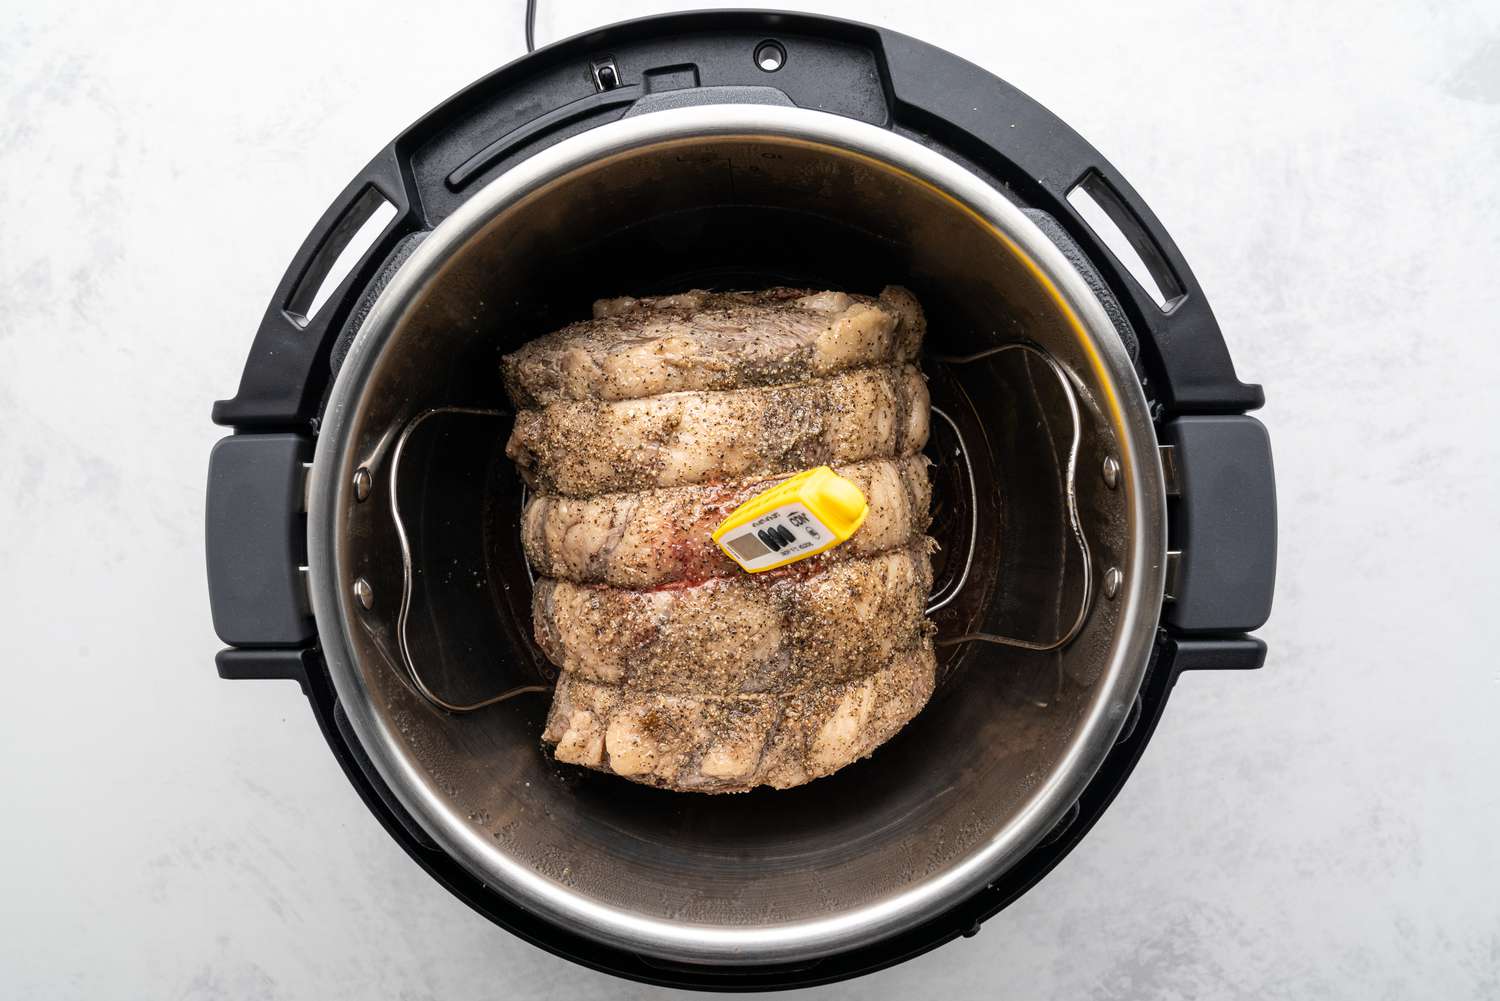 How To Make A 5 Lbs Prime Rib Roast In An Electric Pressure Cooker